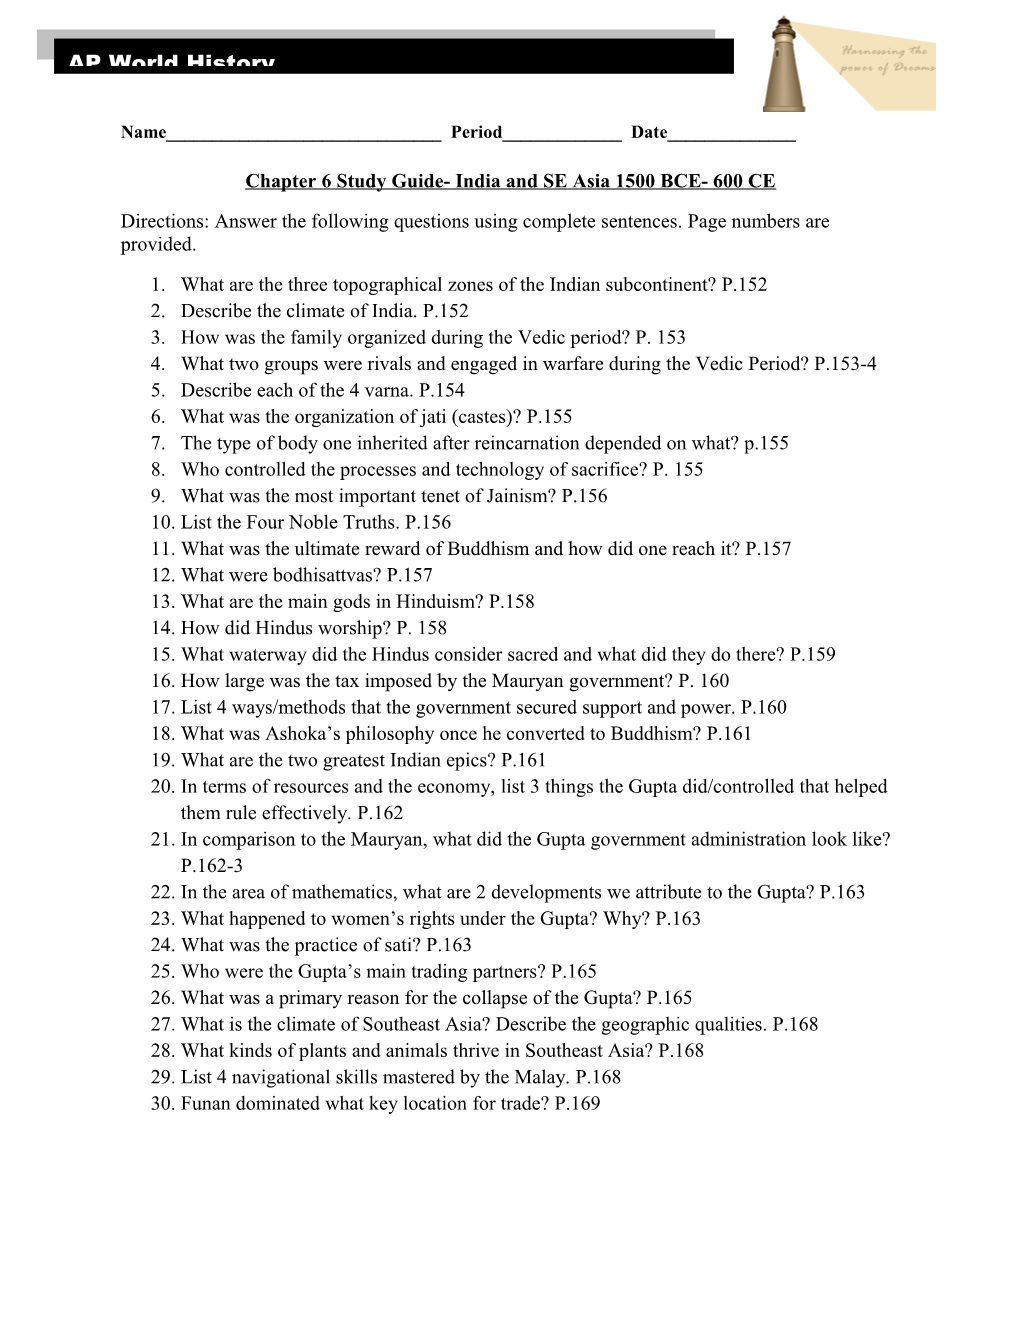 Chapter 6 Study Guide- India and SE Asia 1500 BCE- 600 CE